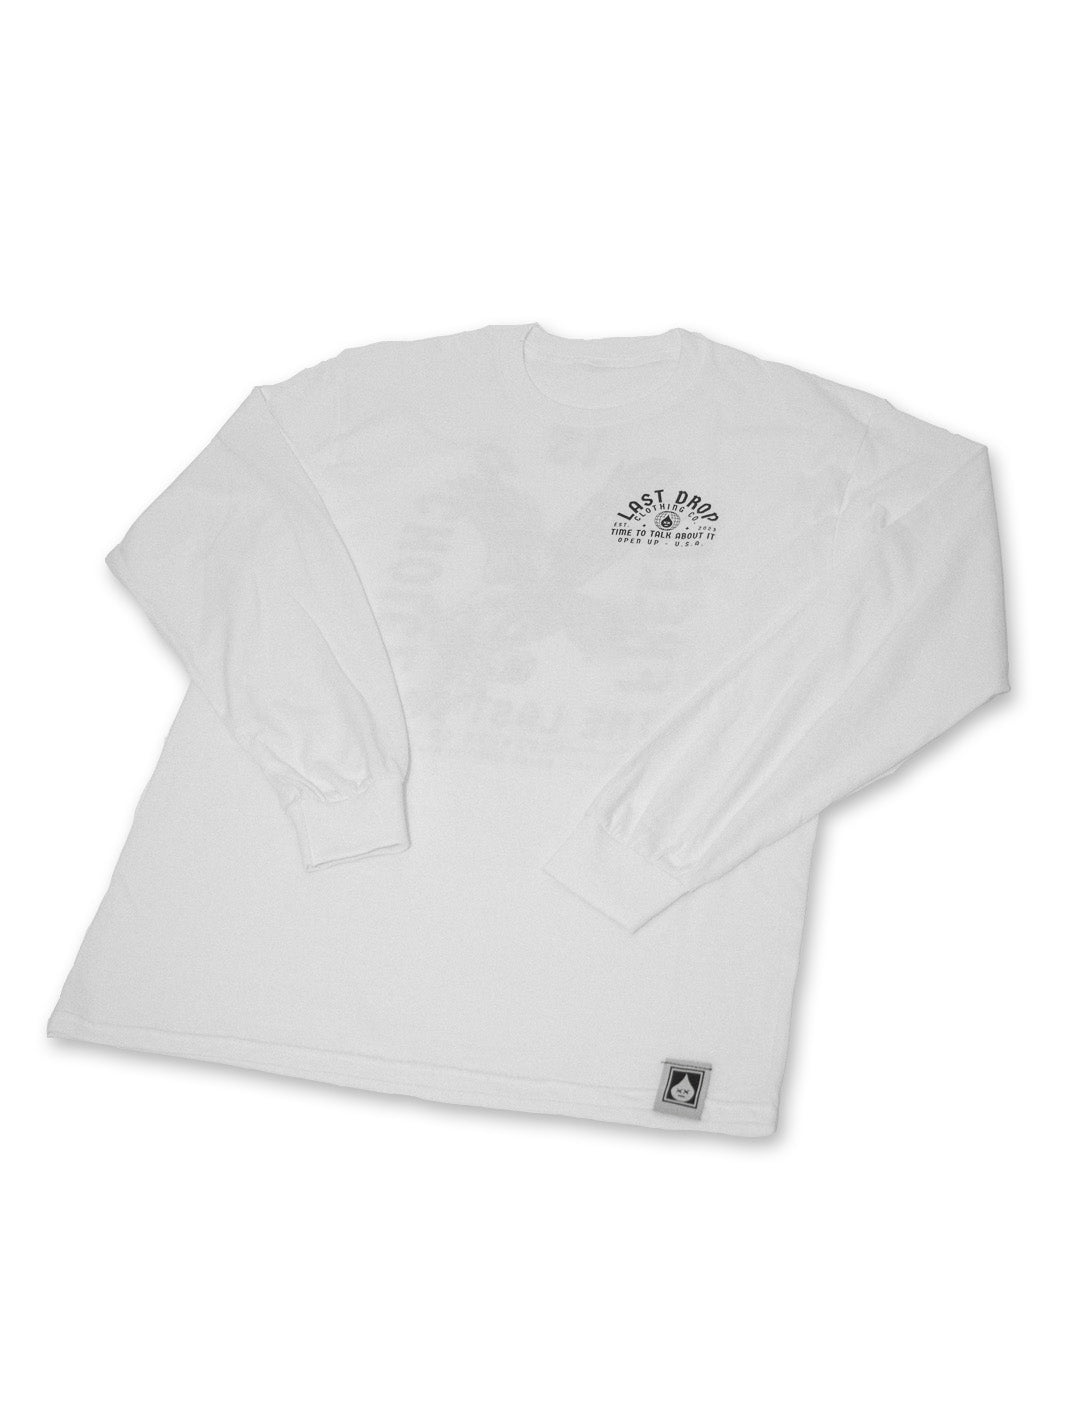 A white long-sleeve t-shirt with an image of a horse representing strength and freedom.